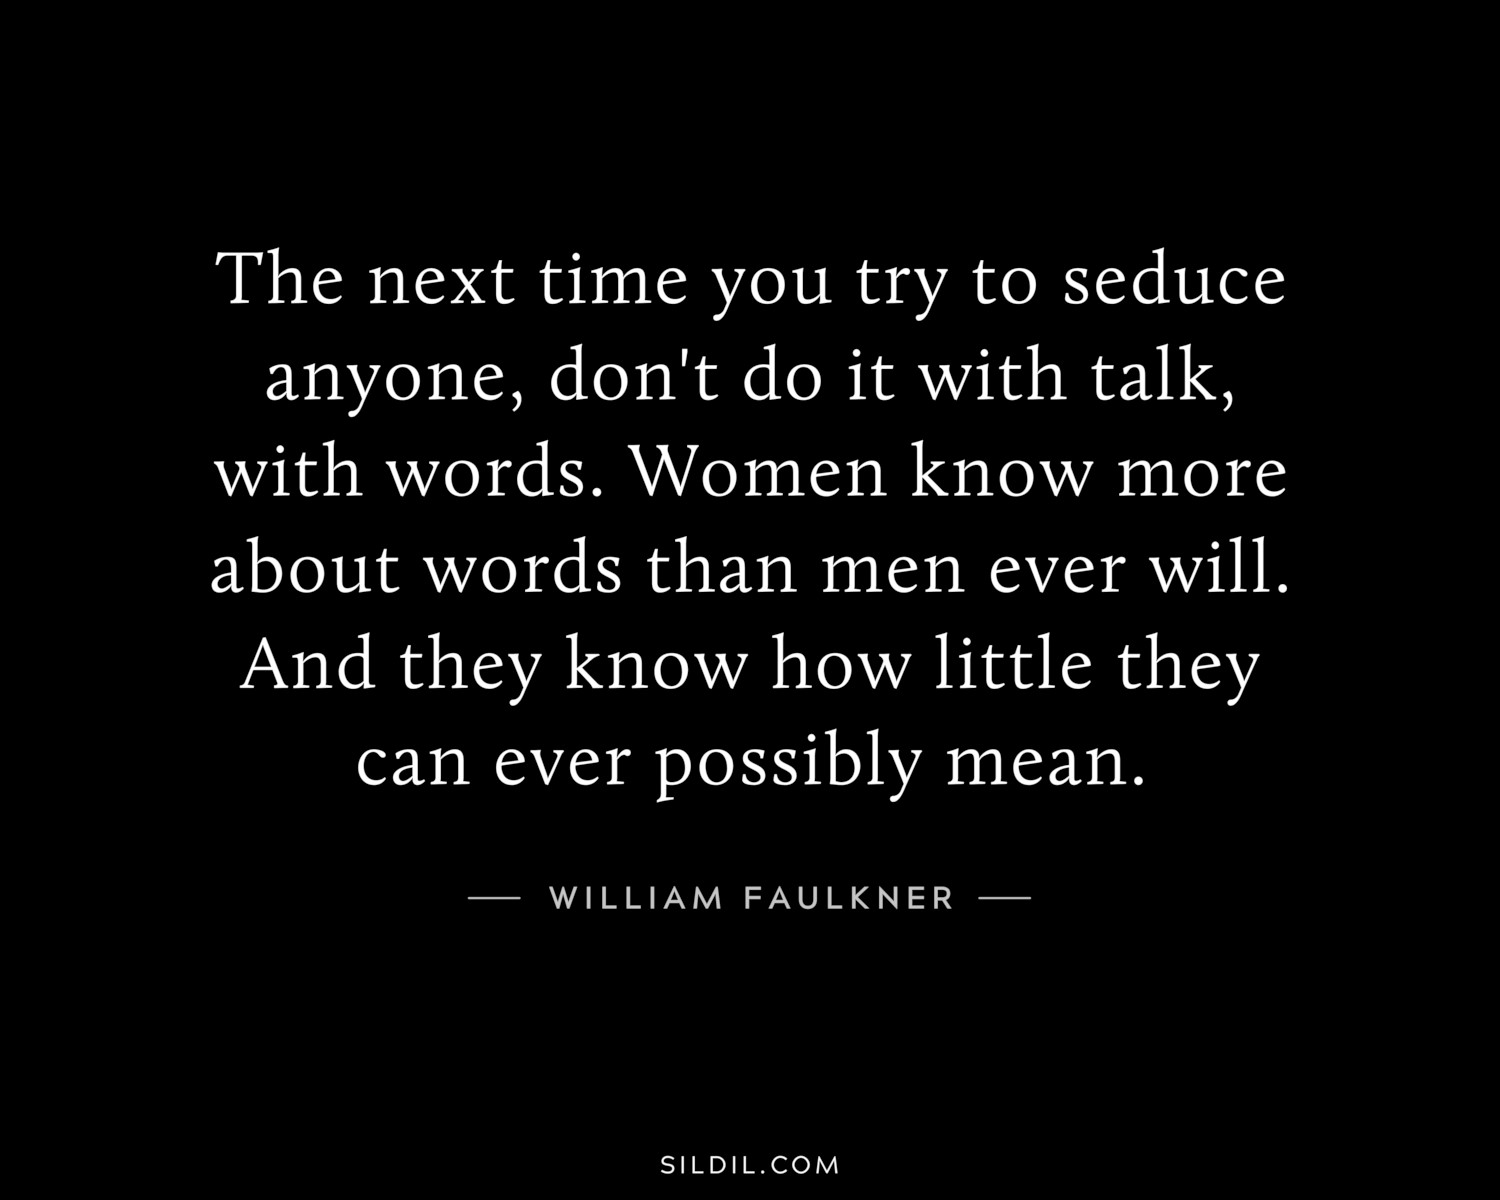 The next time you try to seduce anyone, don't do it with talk, with words. Women know more about words than men ever will. And they know how little they can ever possibly mean.